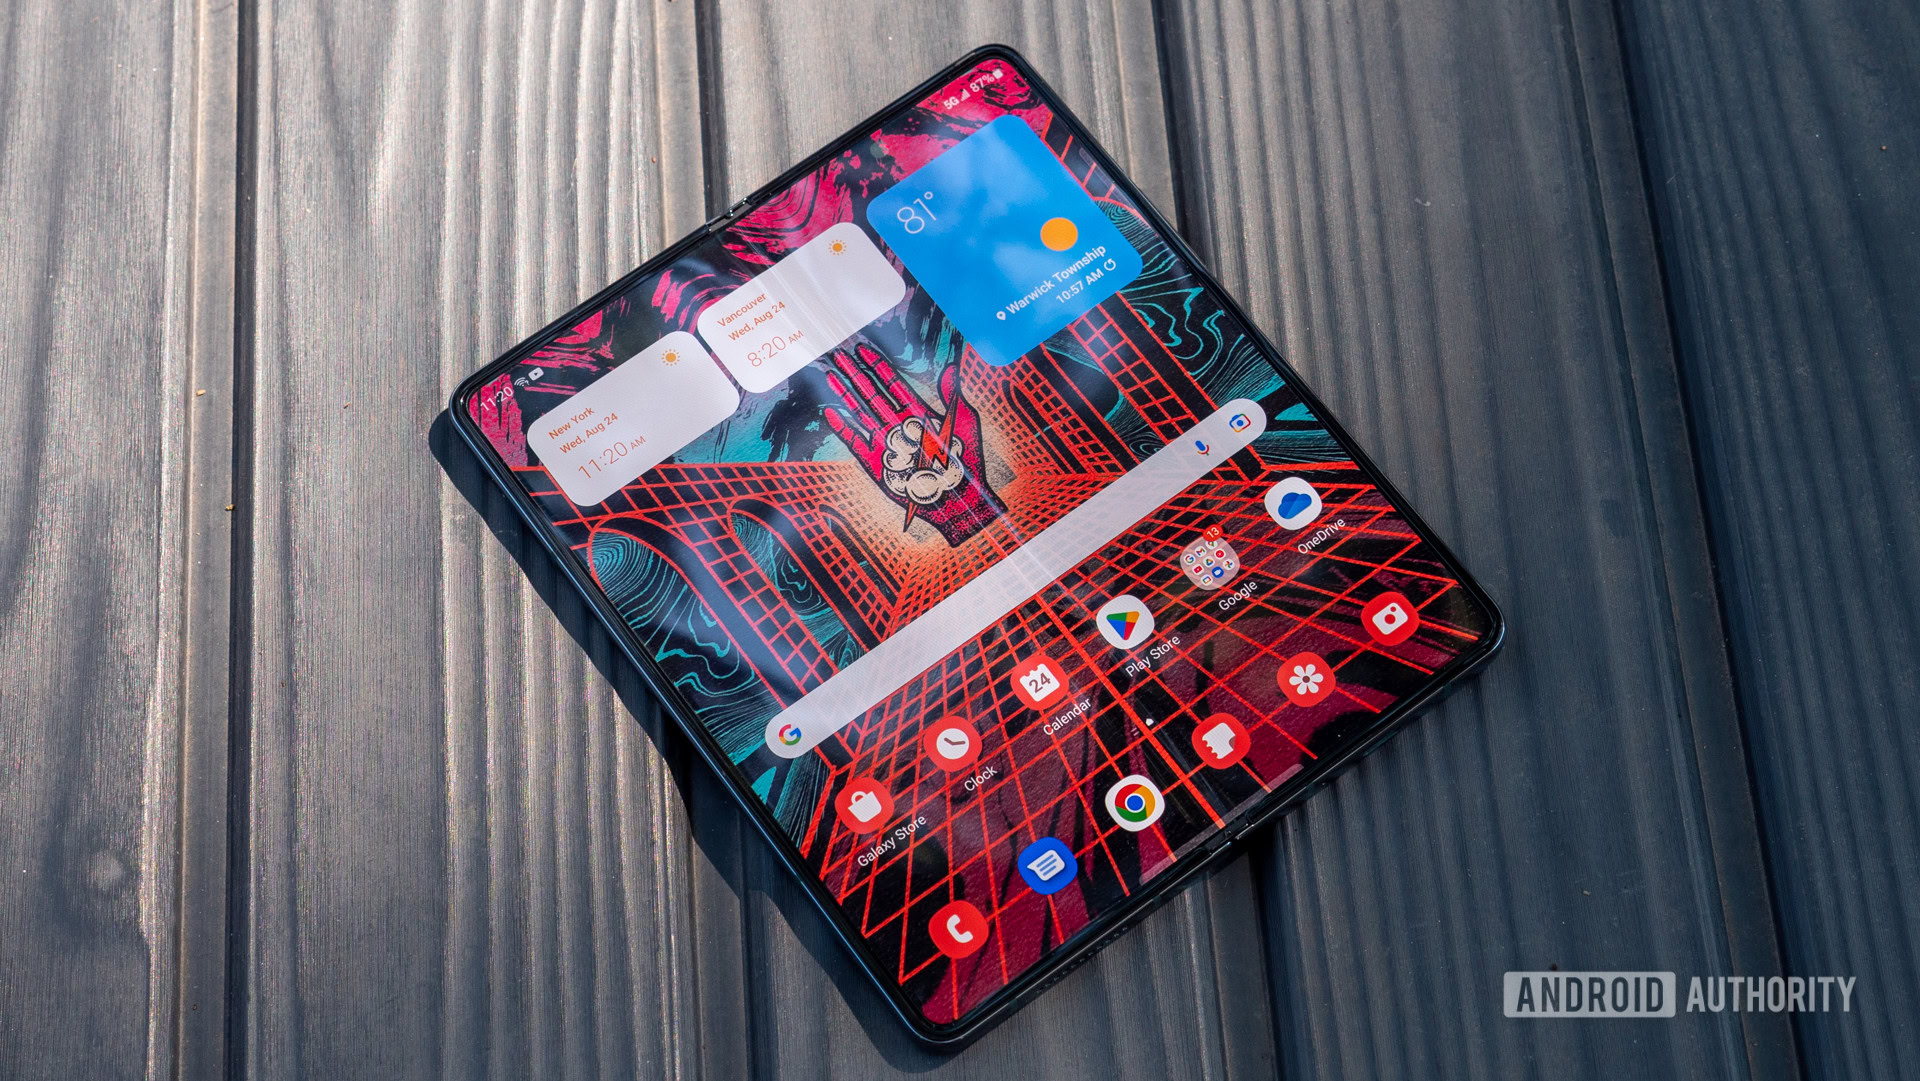 Download the wallpapers of the Samsung Galaxy Z Fold 4 and Flip 4  Droid  News